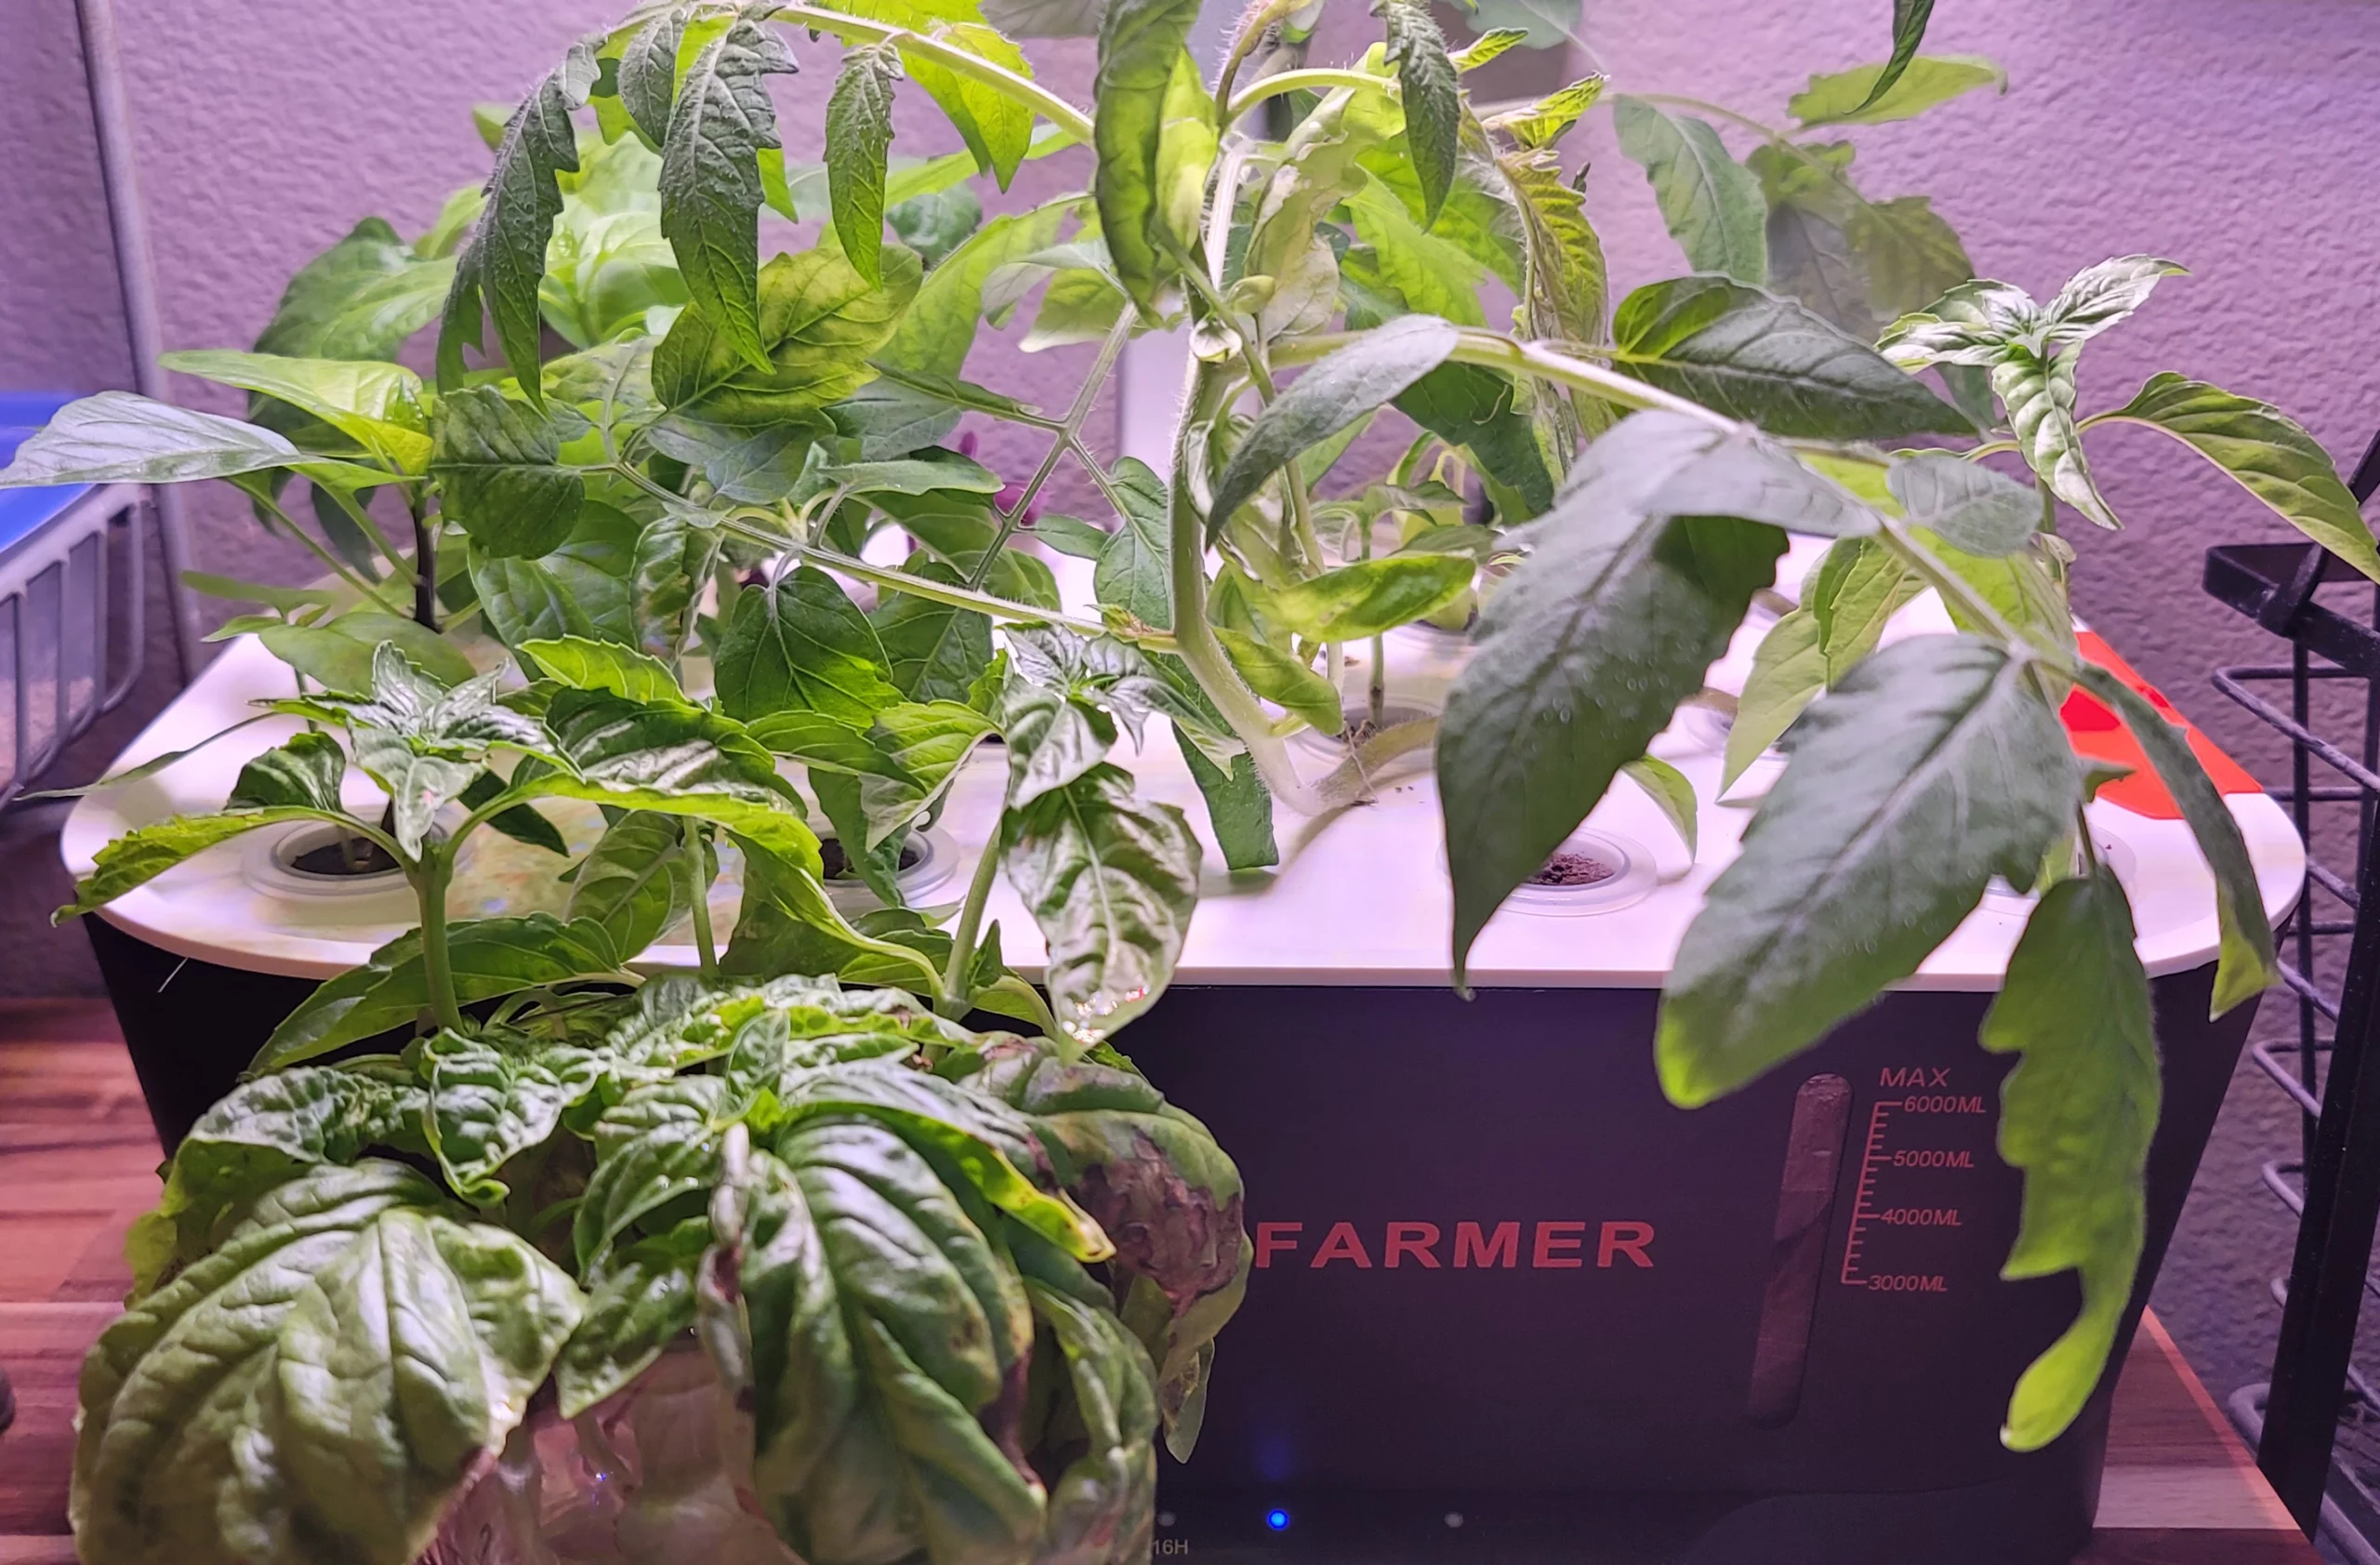 Spider Farmer Smart G12 Indoor Hydroponic Grow System with plants